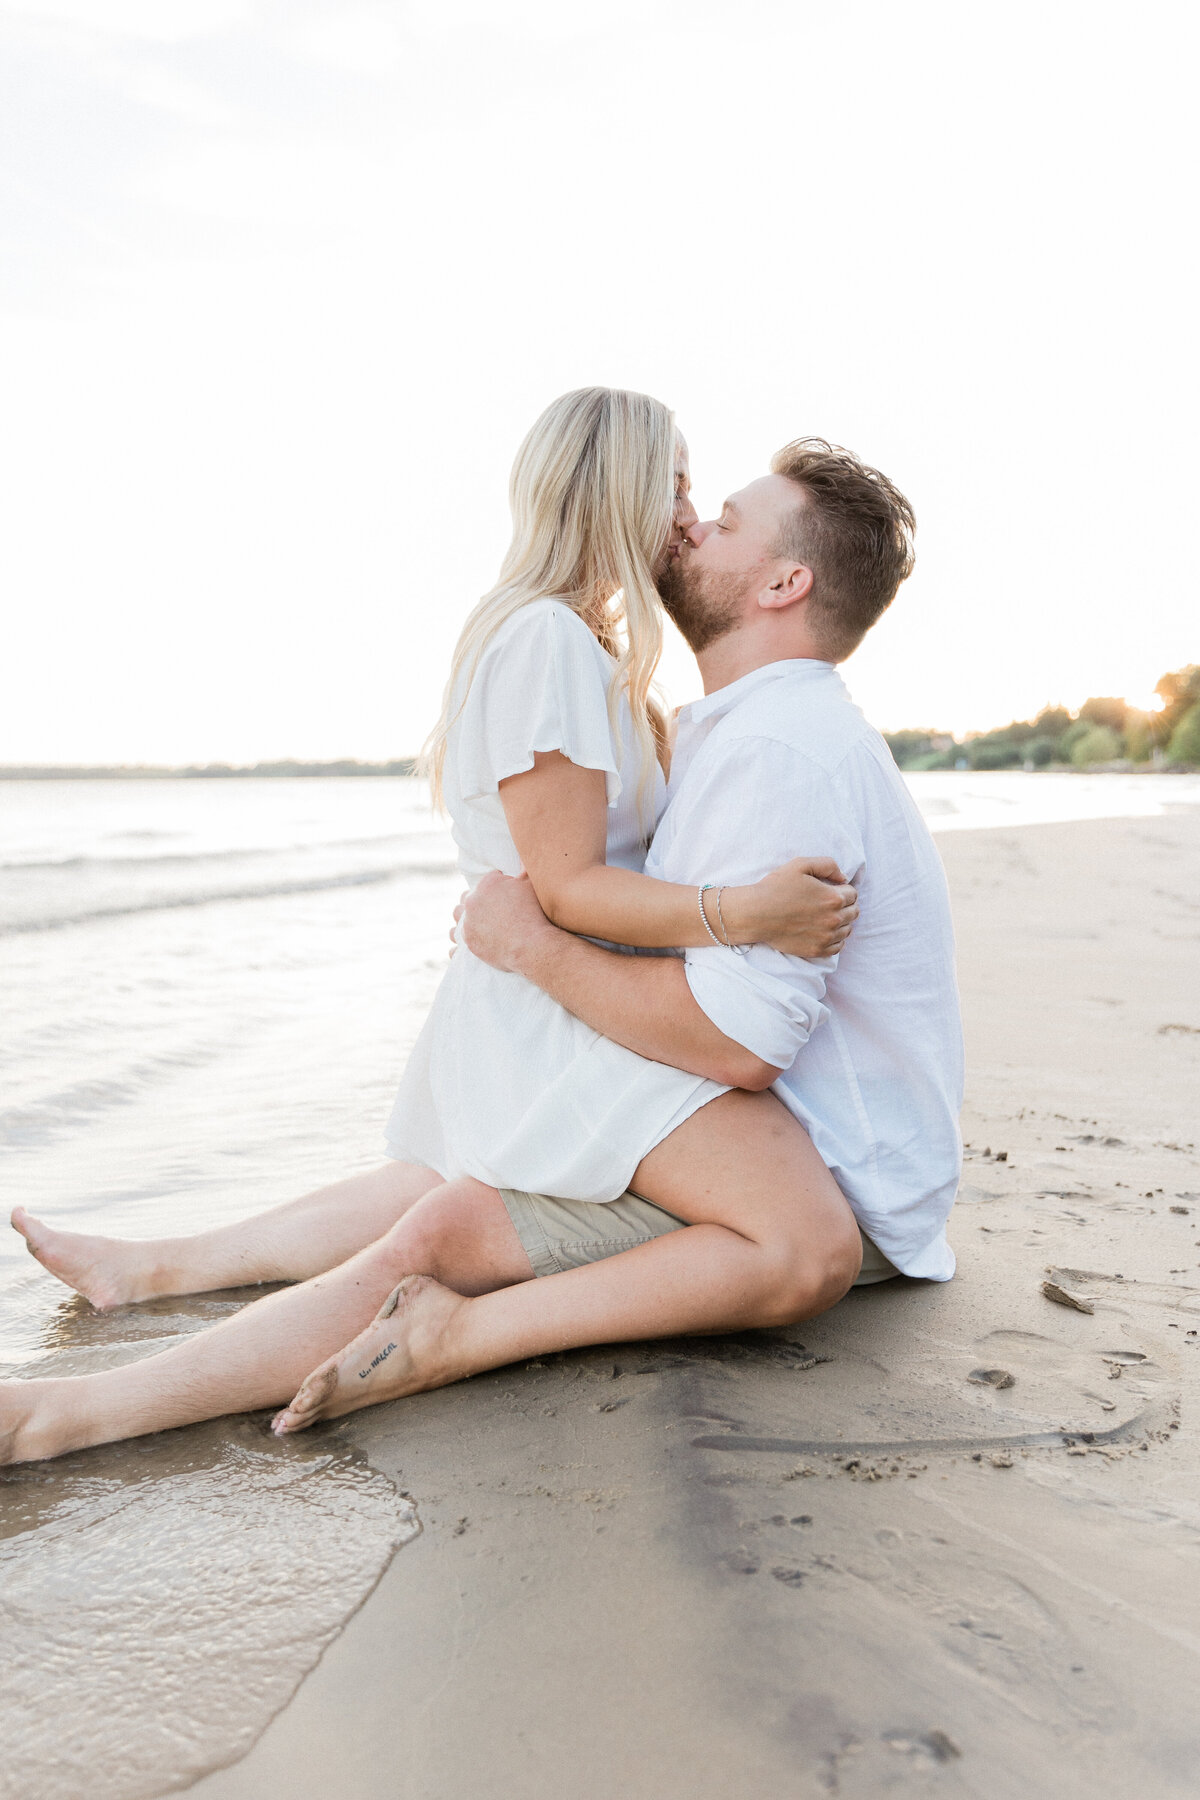 Couple kissing on the sand at the beach